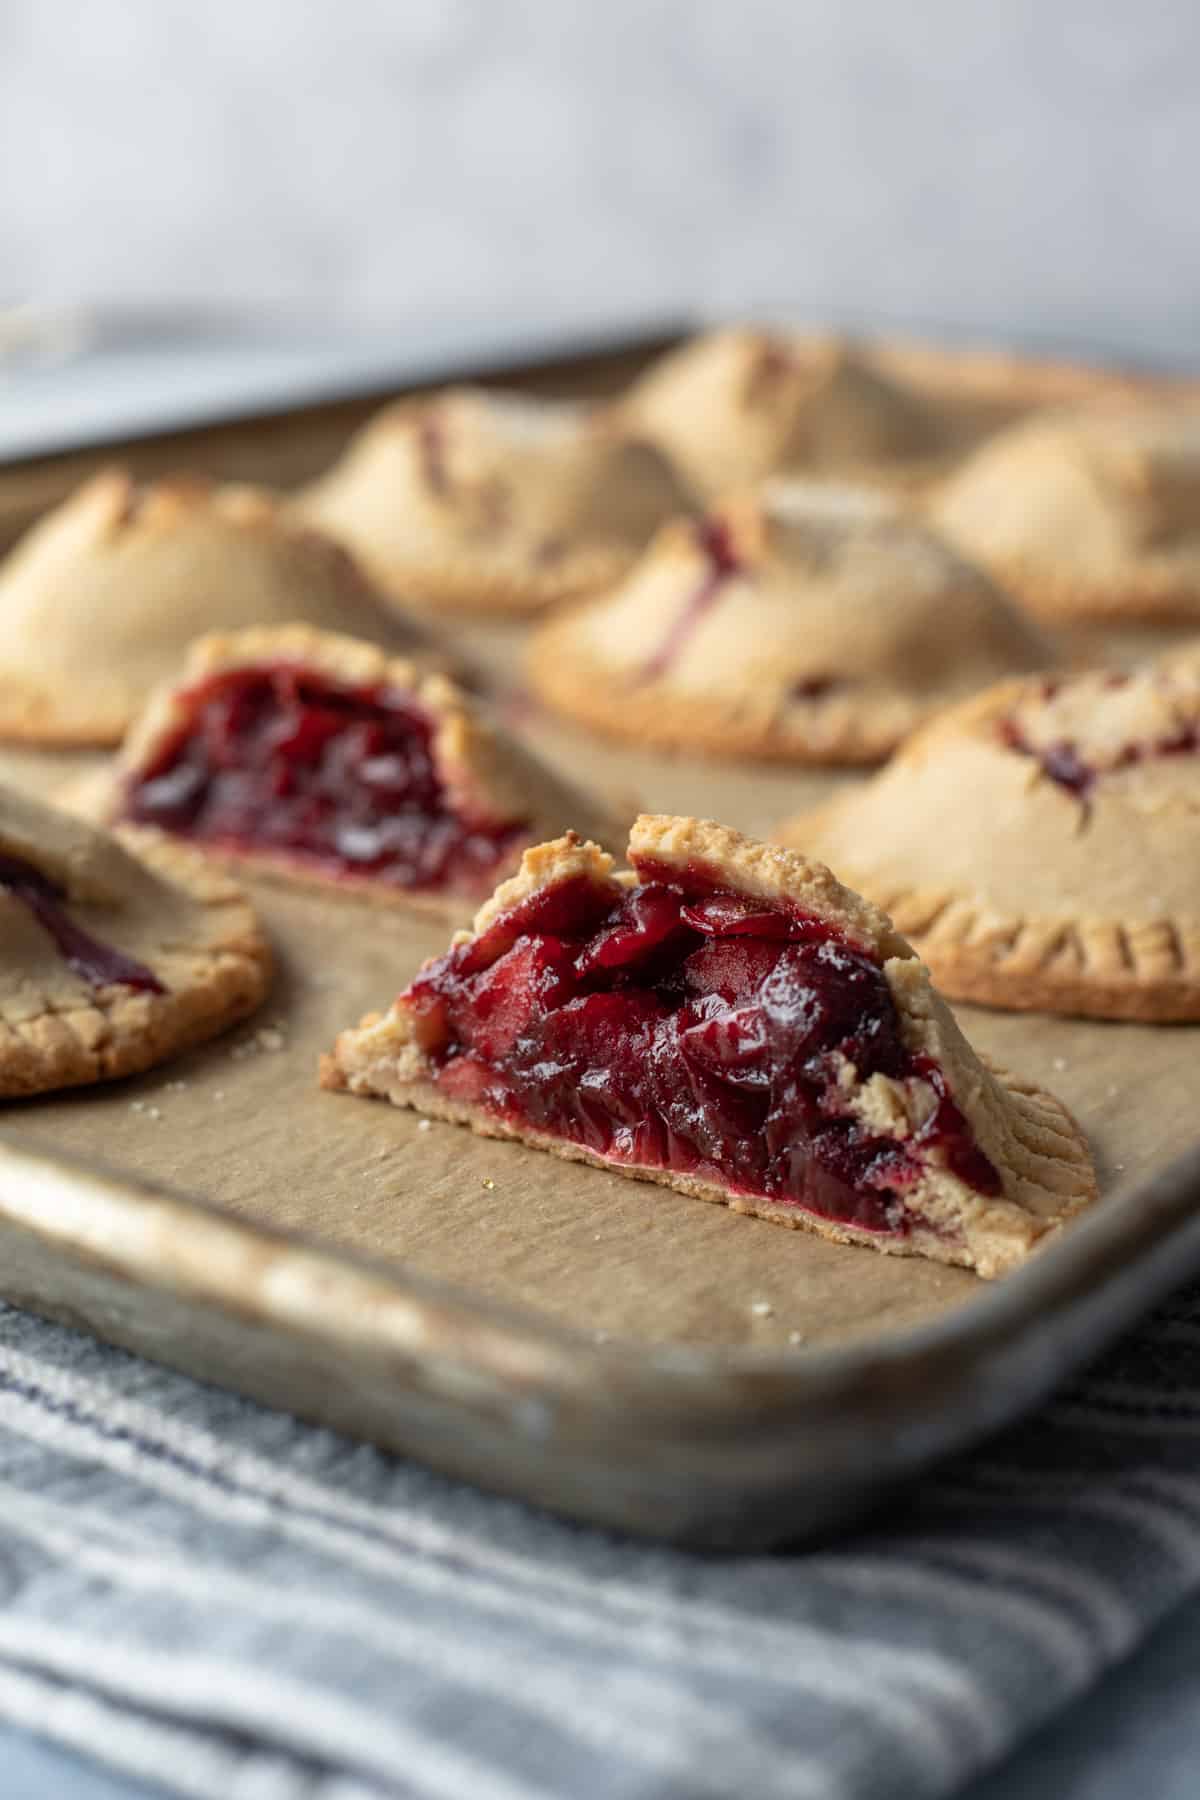 close up showing jammy red apple-cranberry filling inside vegan hand pies.